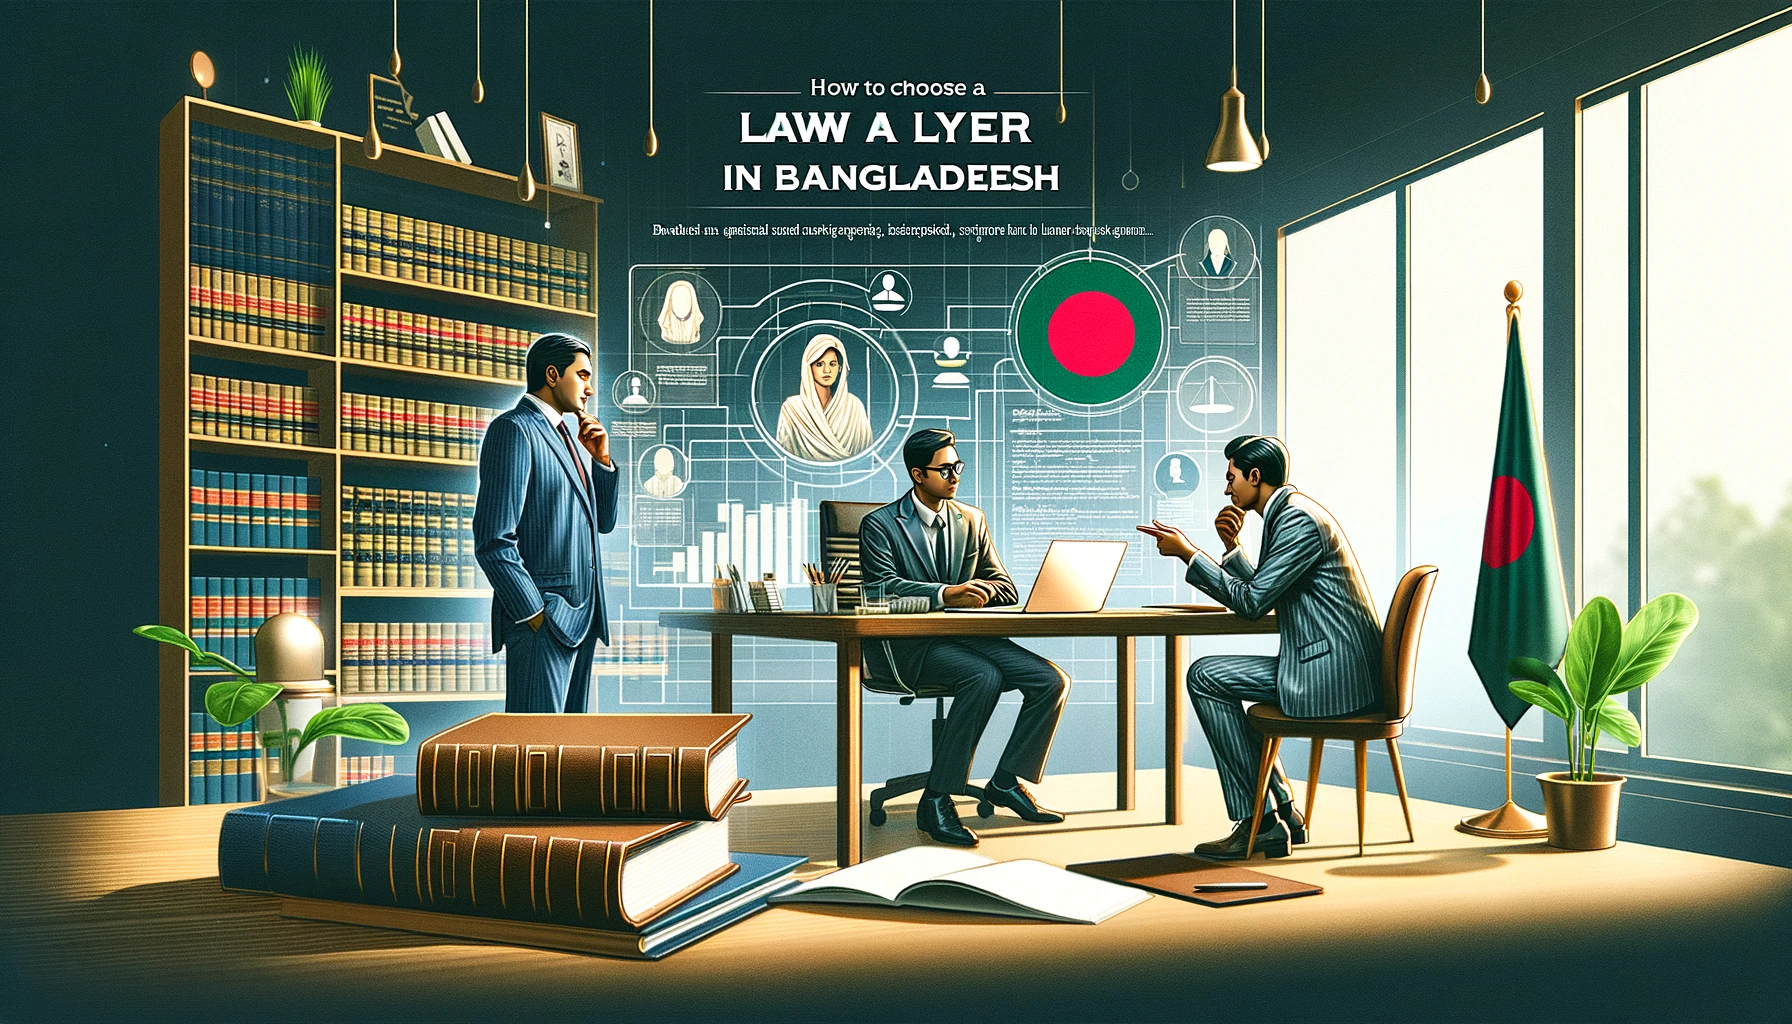 How to Choose a Lawyer in Bangladesh